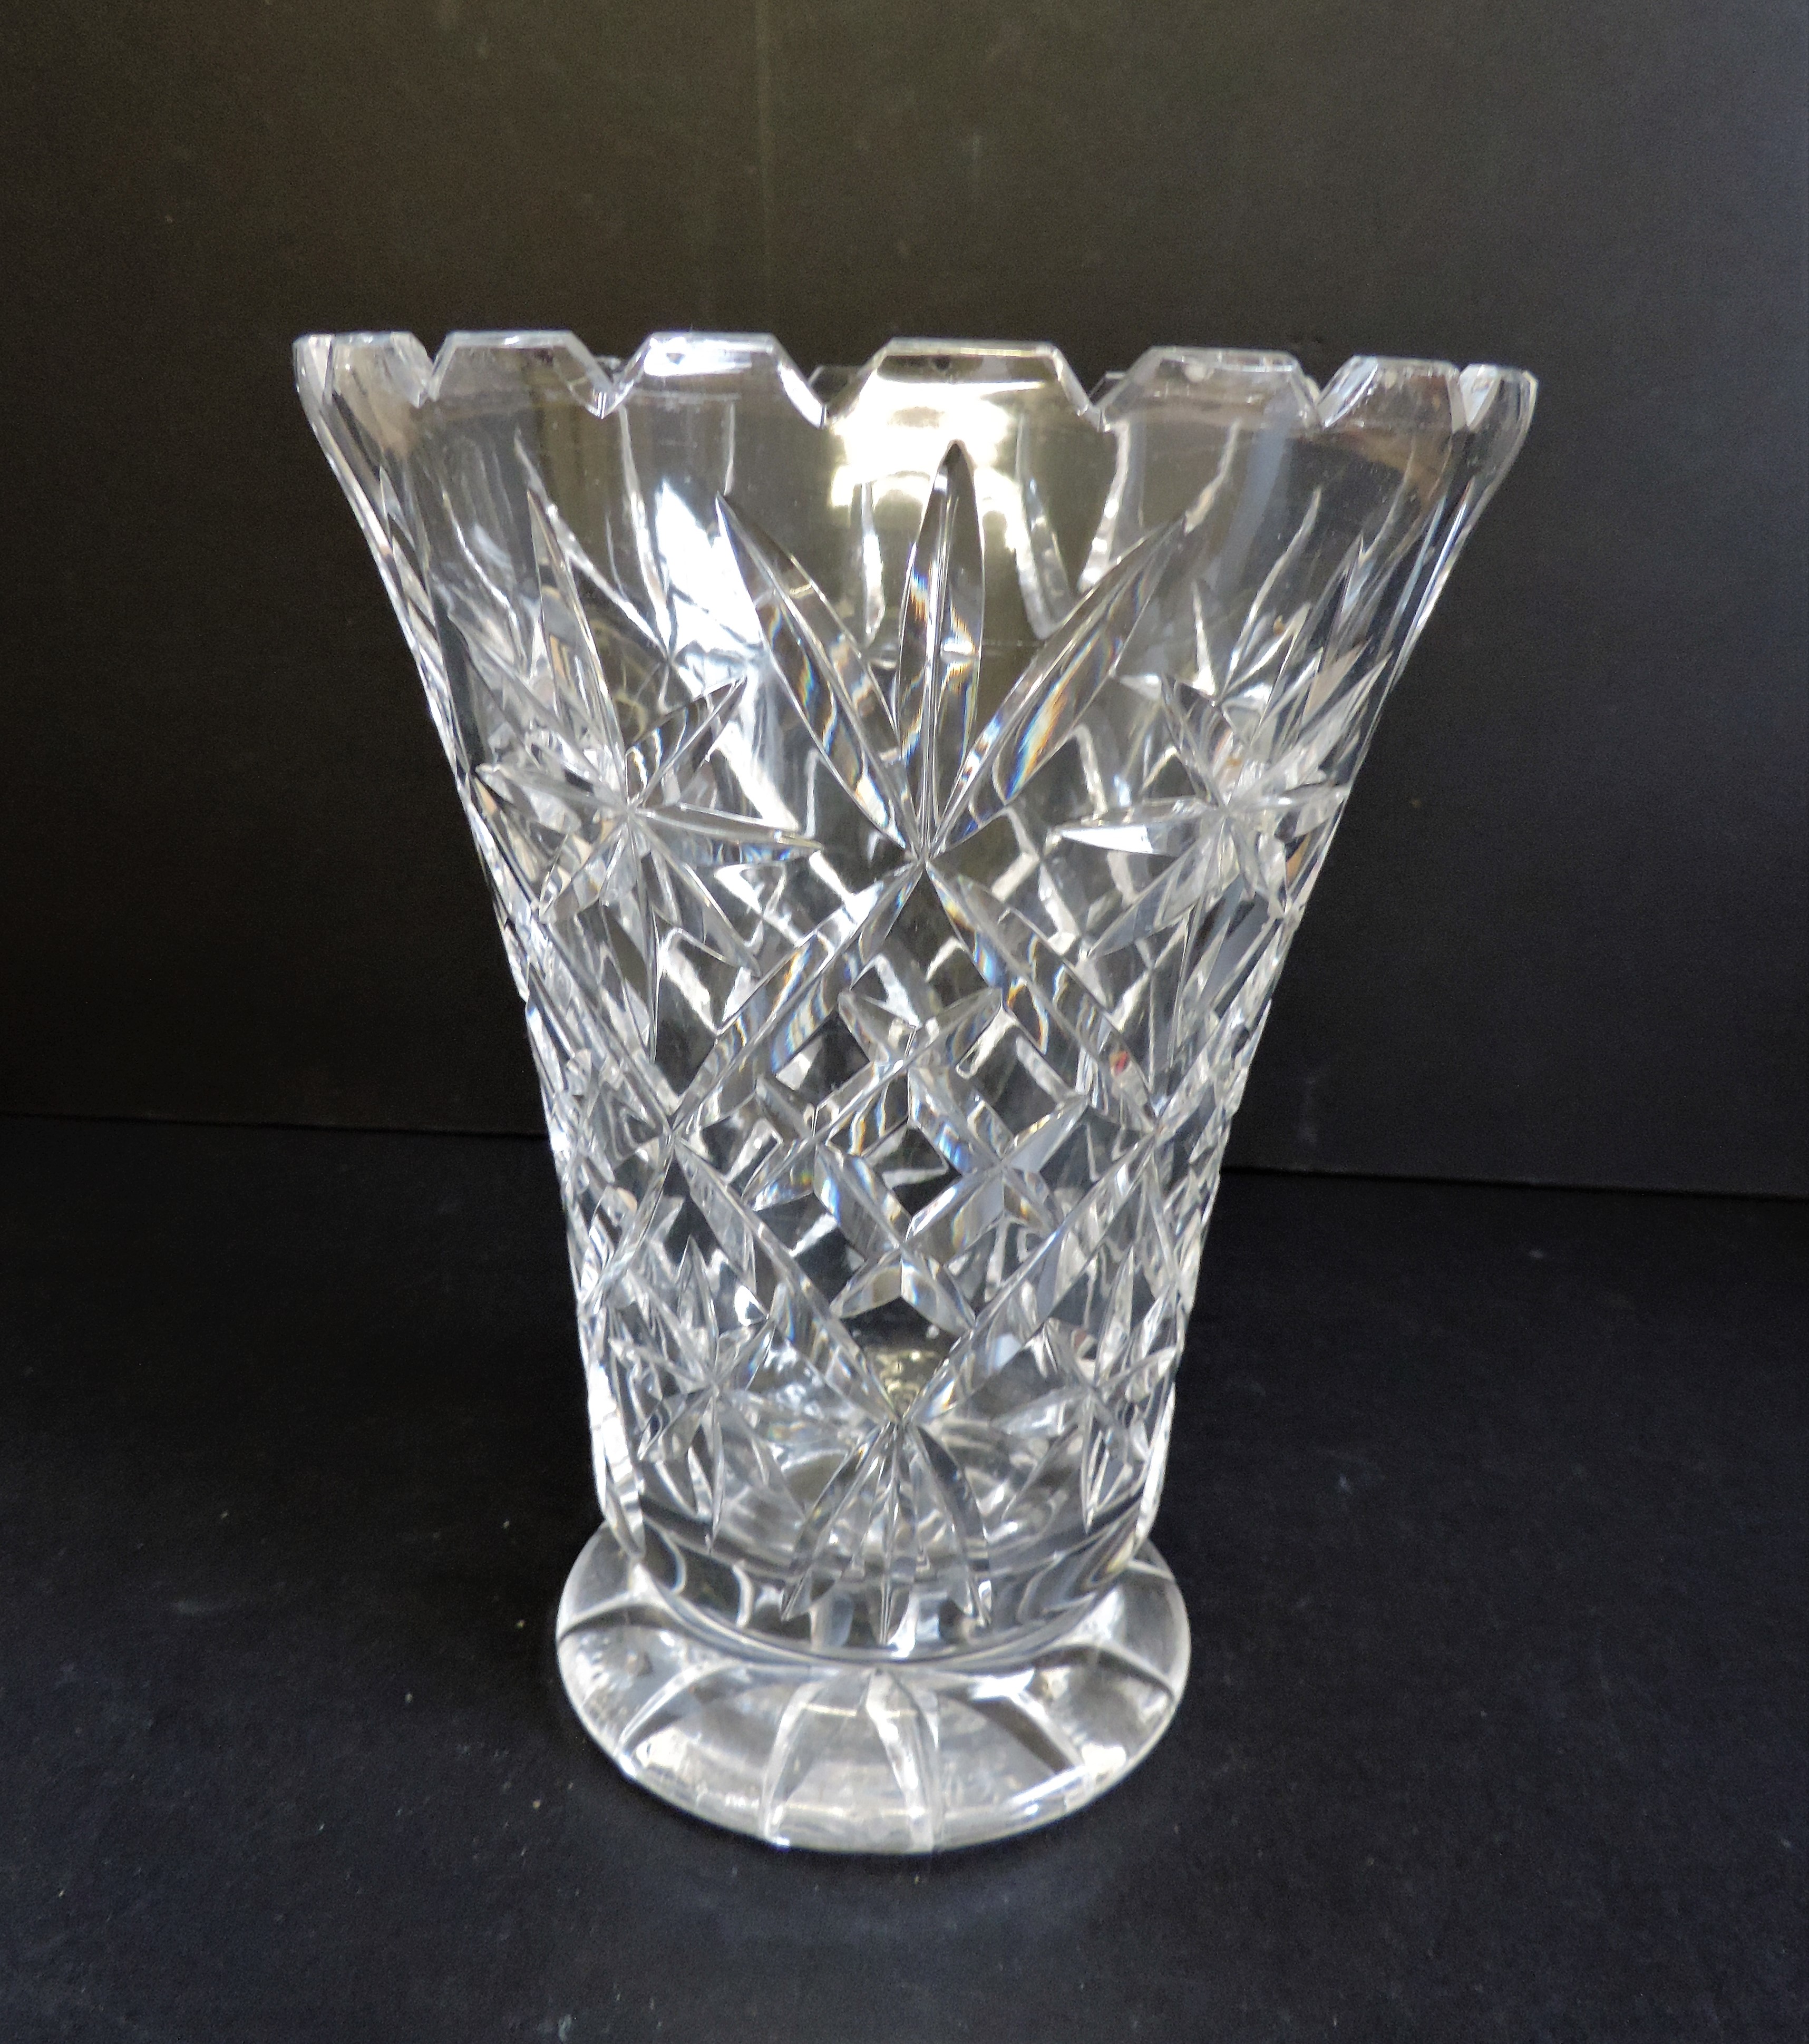 Antique Crystal Vase 18cm Tall - Image 2 of 4